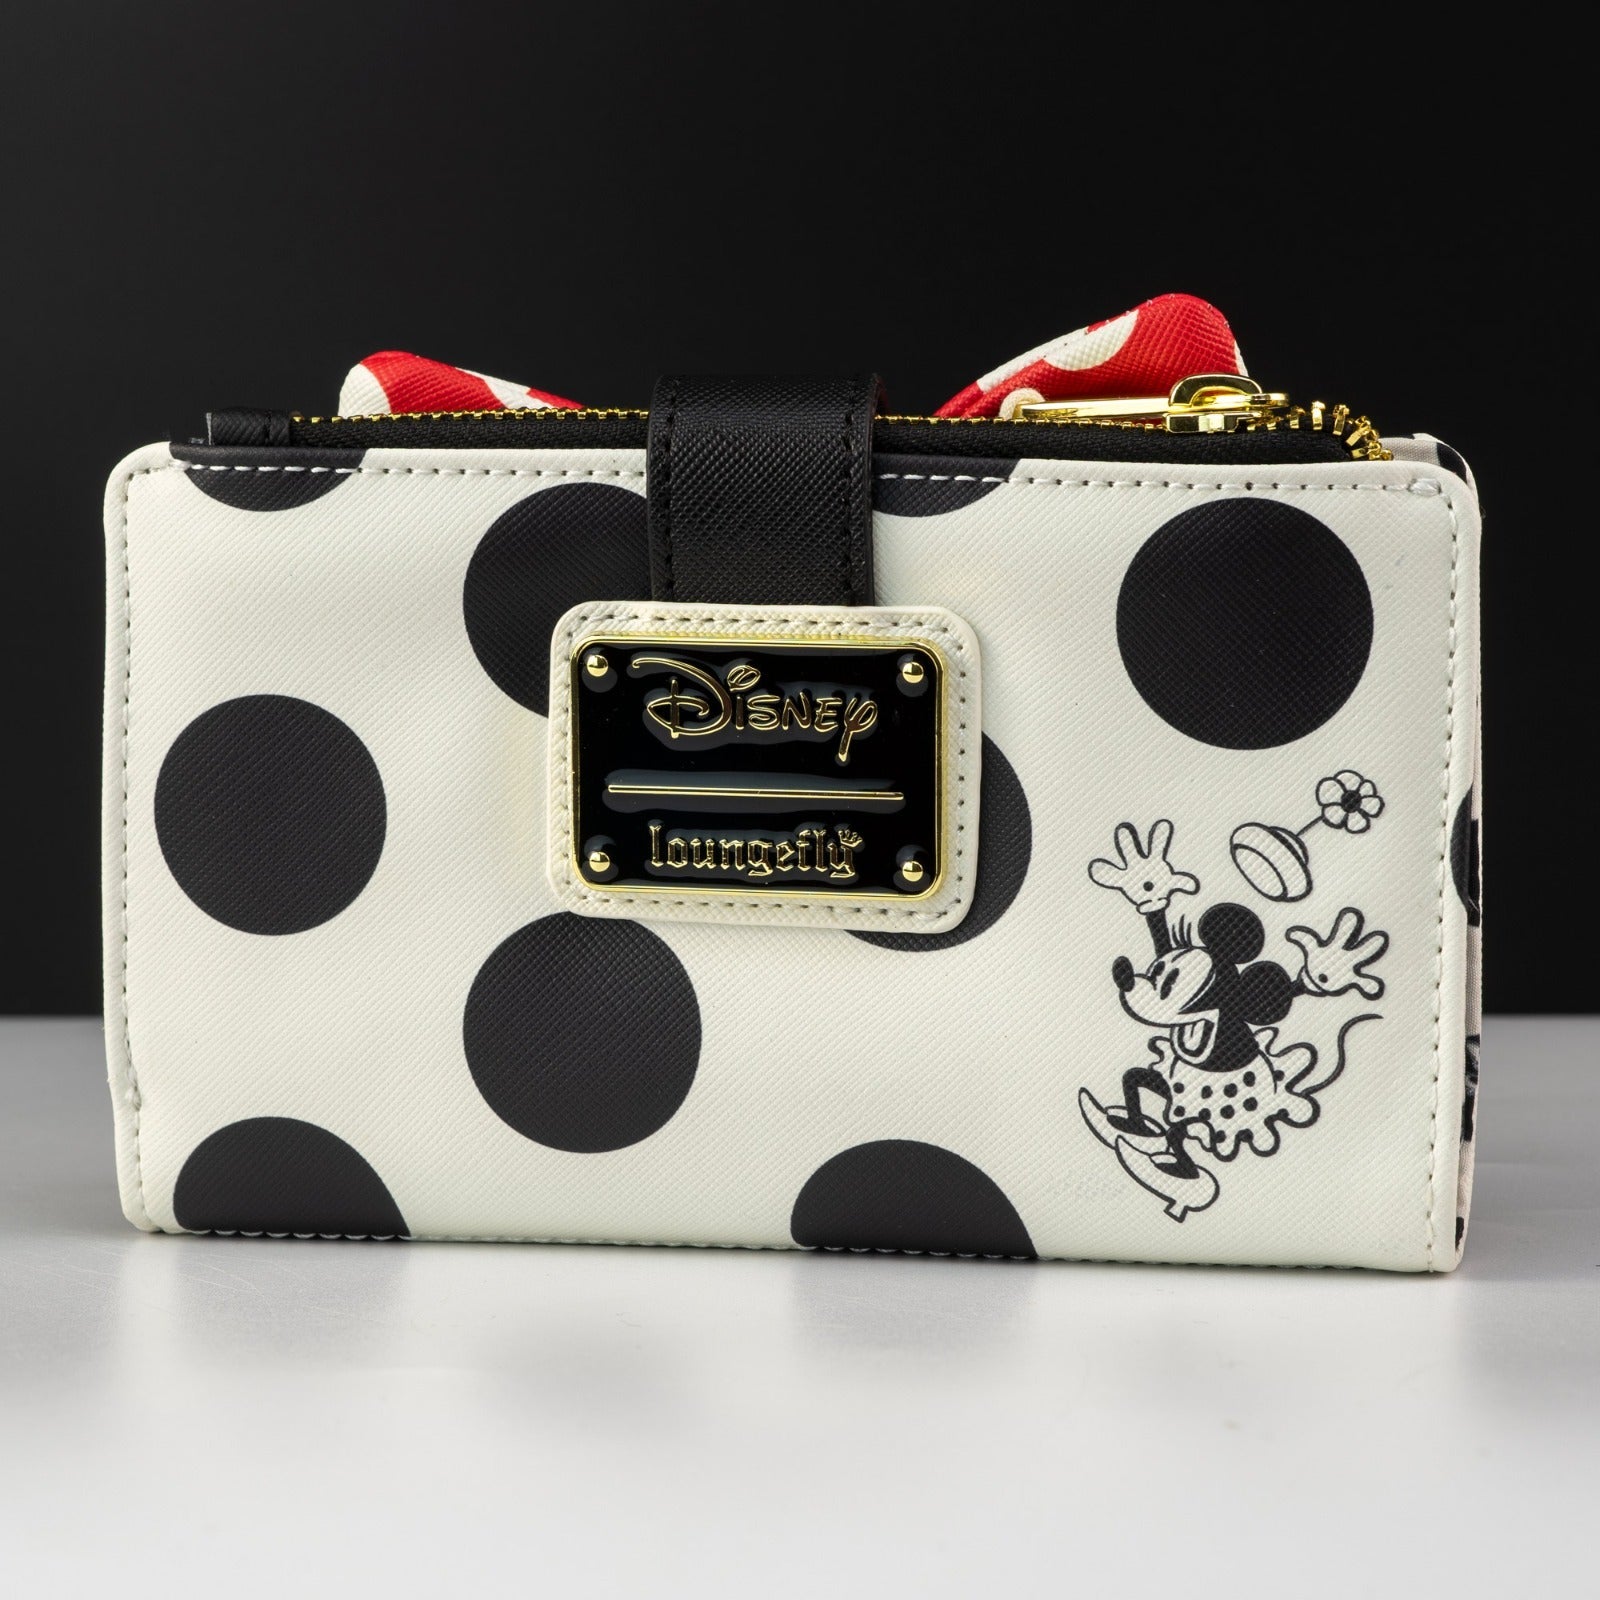 Loungefly x Disney Minnie Mouse Rocks The Dots Wallet - GeekCore